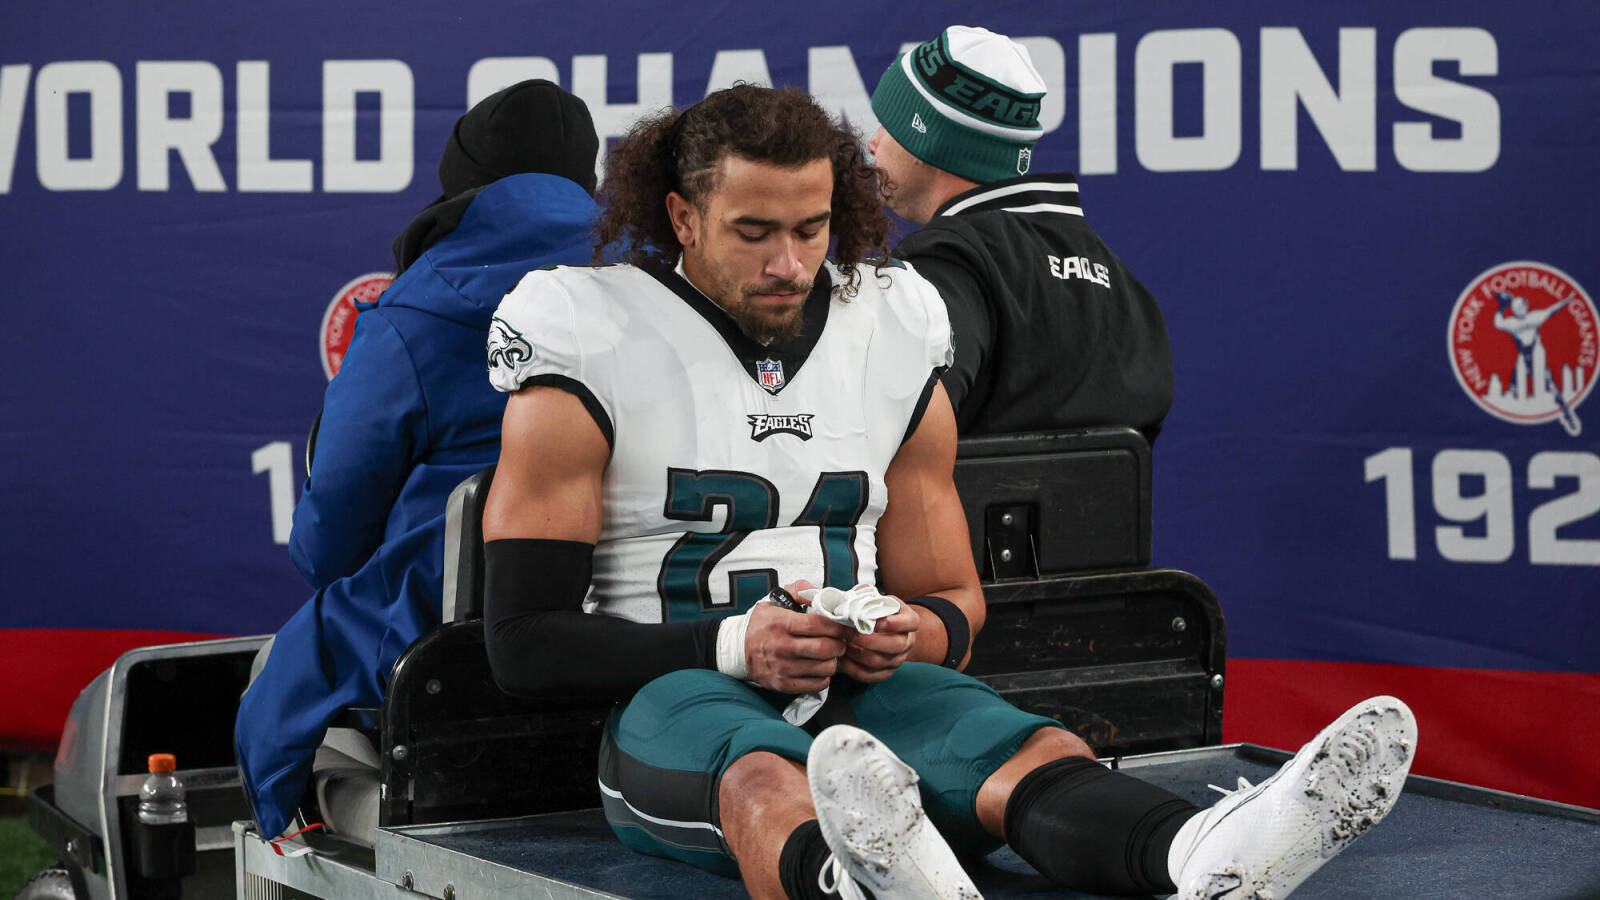 Injured Eagles safety believes he will be ready for season